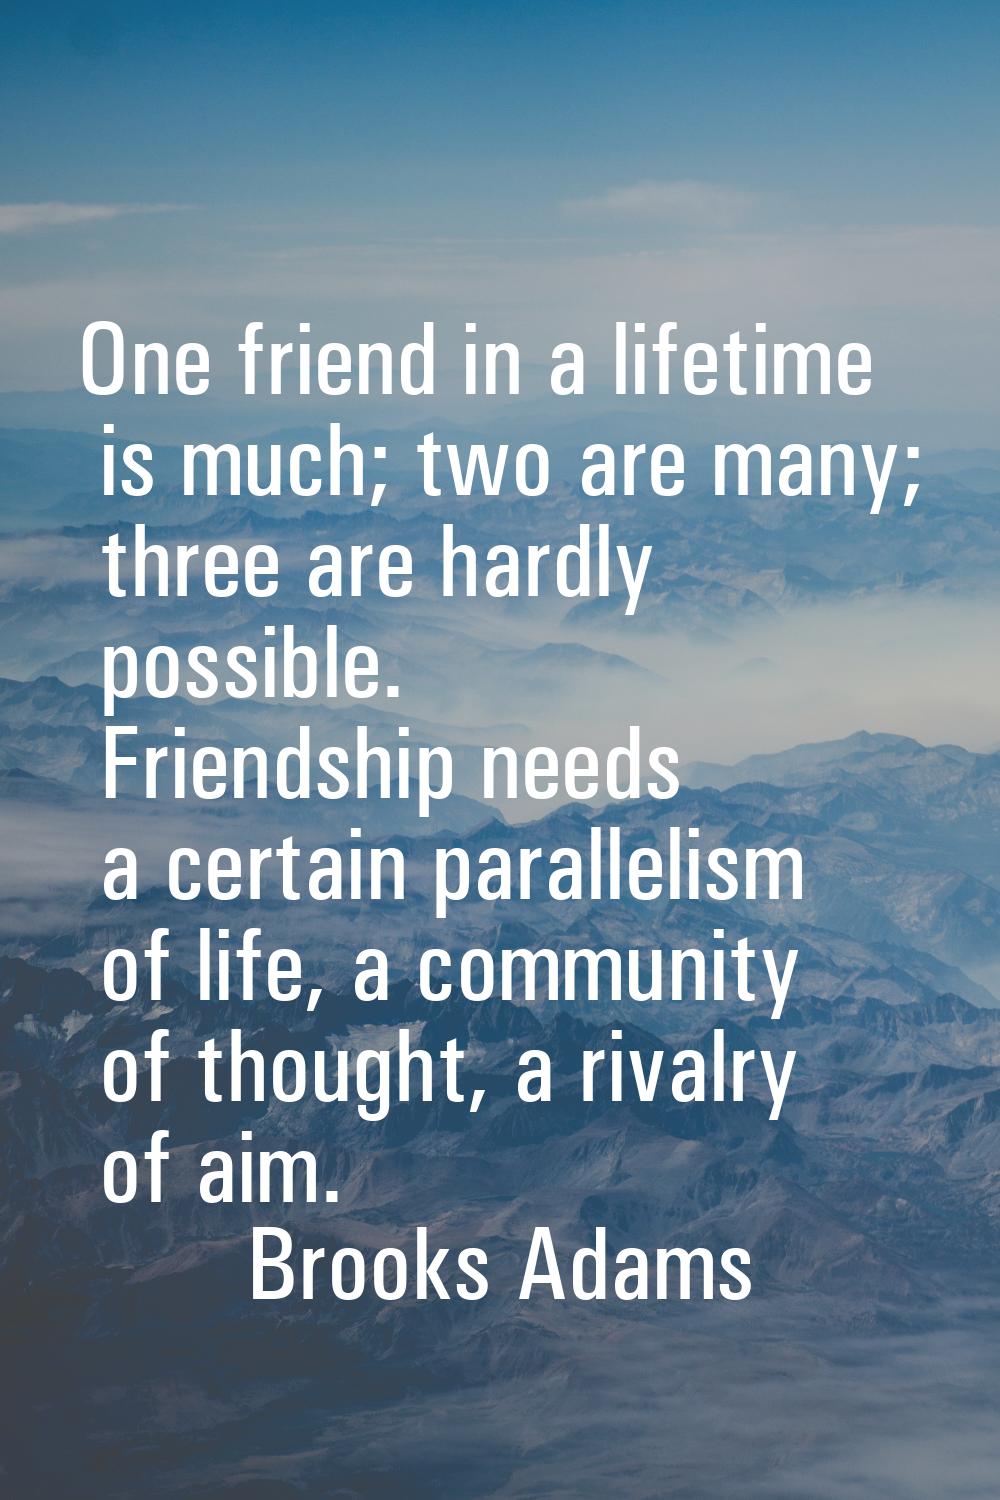 One friend in a lifetime is much; two are many; three are hardly possible. Friendship needs a certa